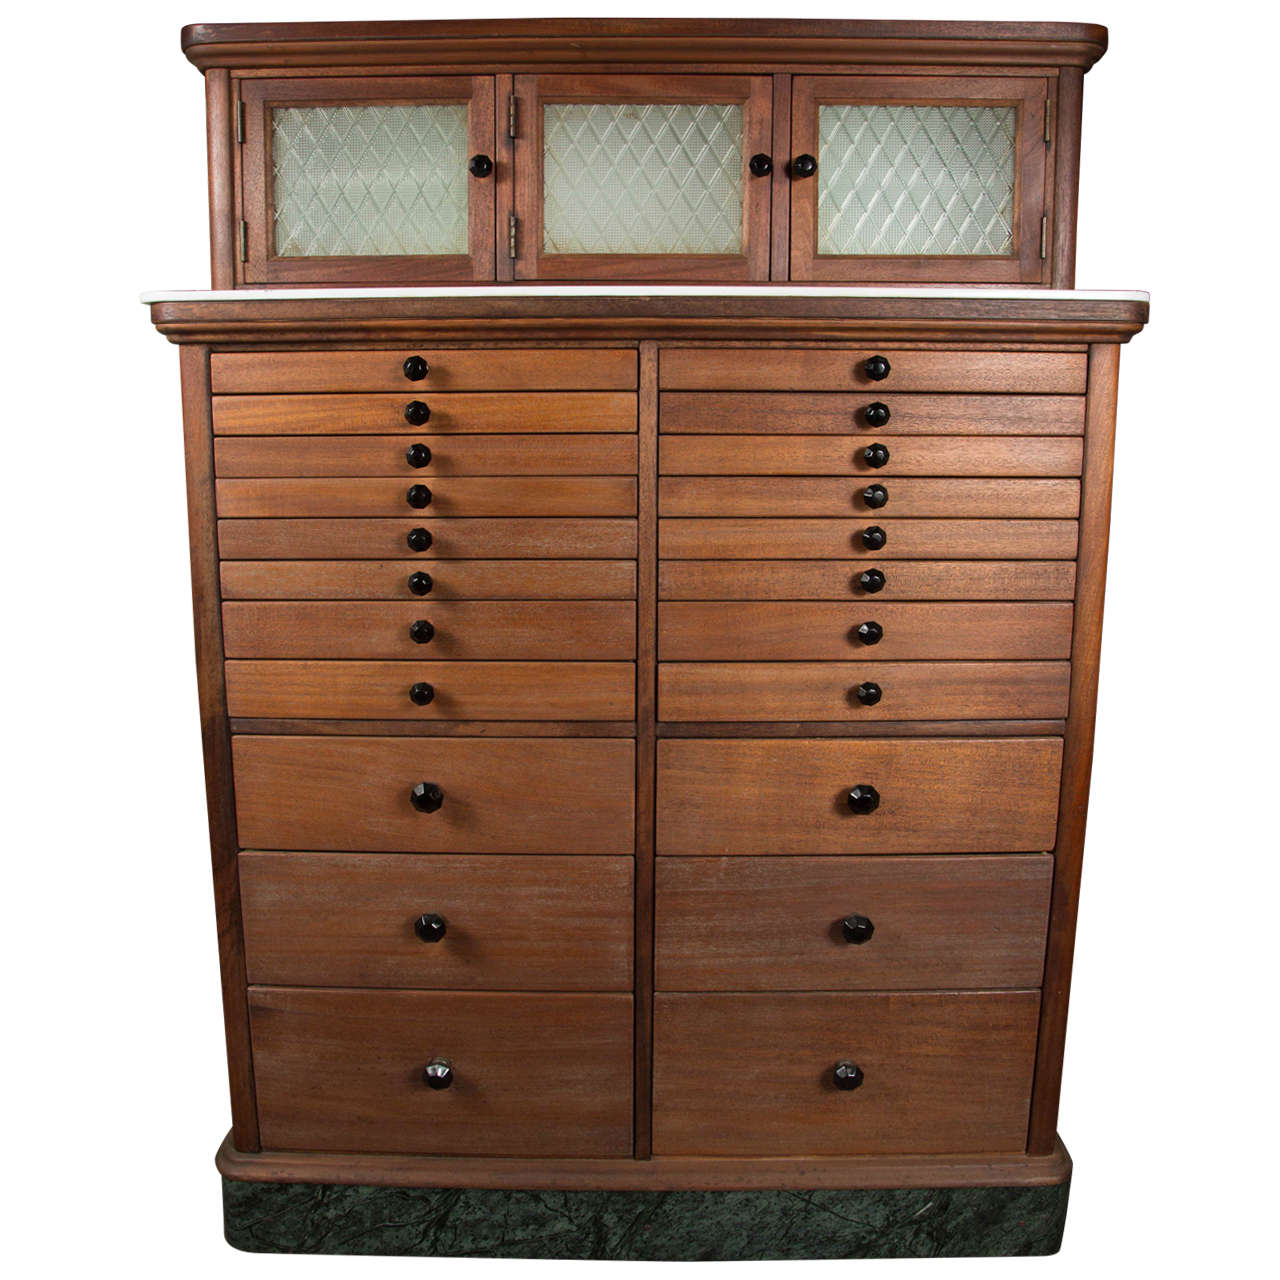 1920s Wooden Dental Cabinet with Textured Glass and Black Pulls